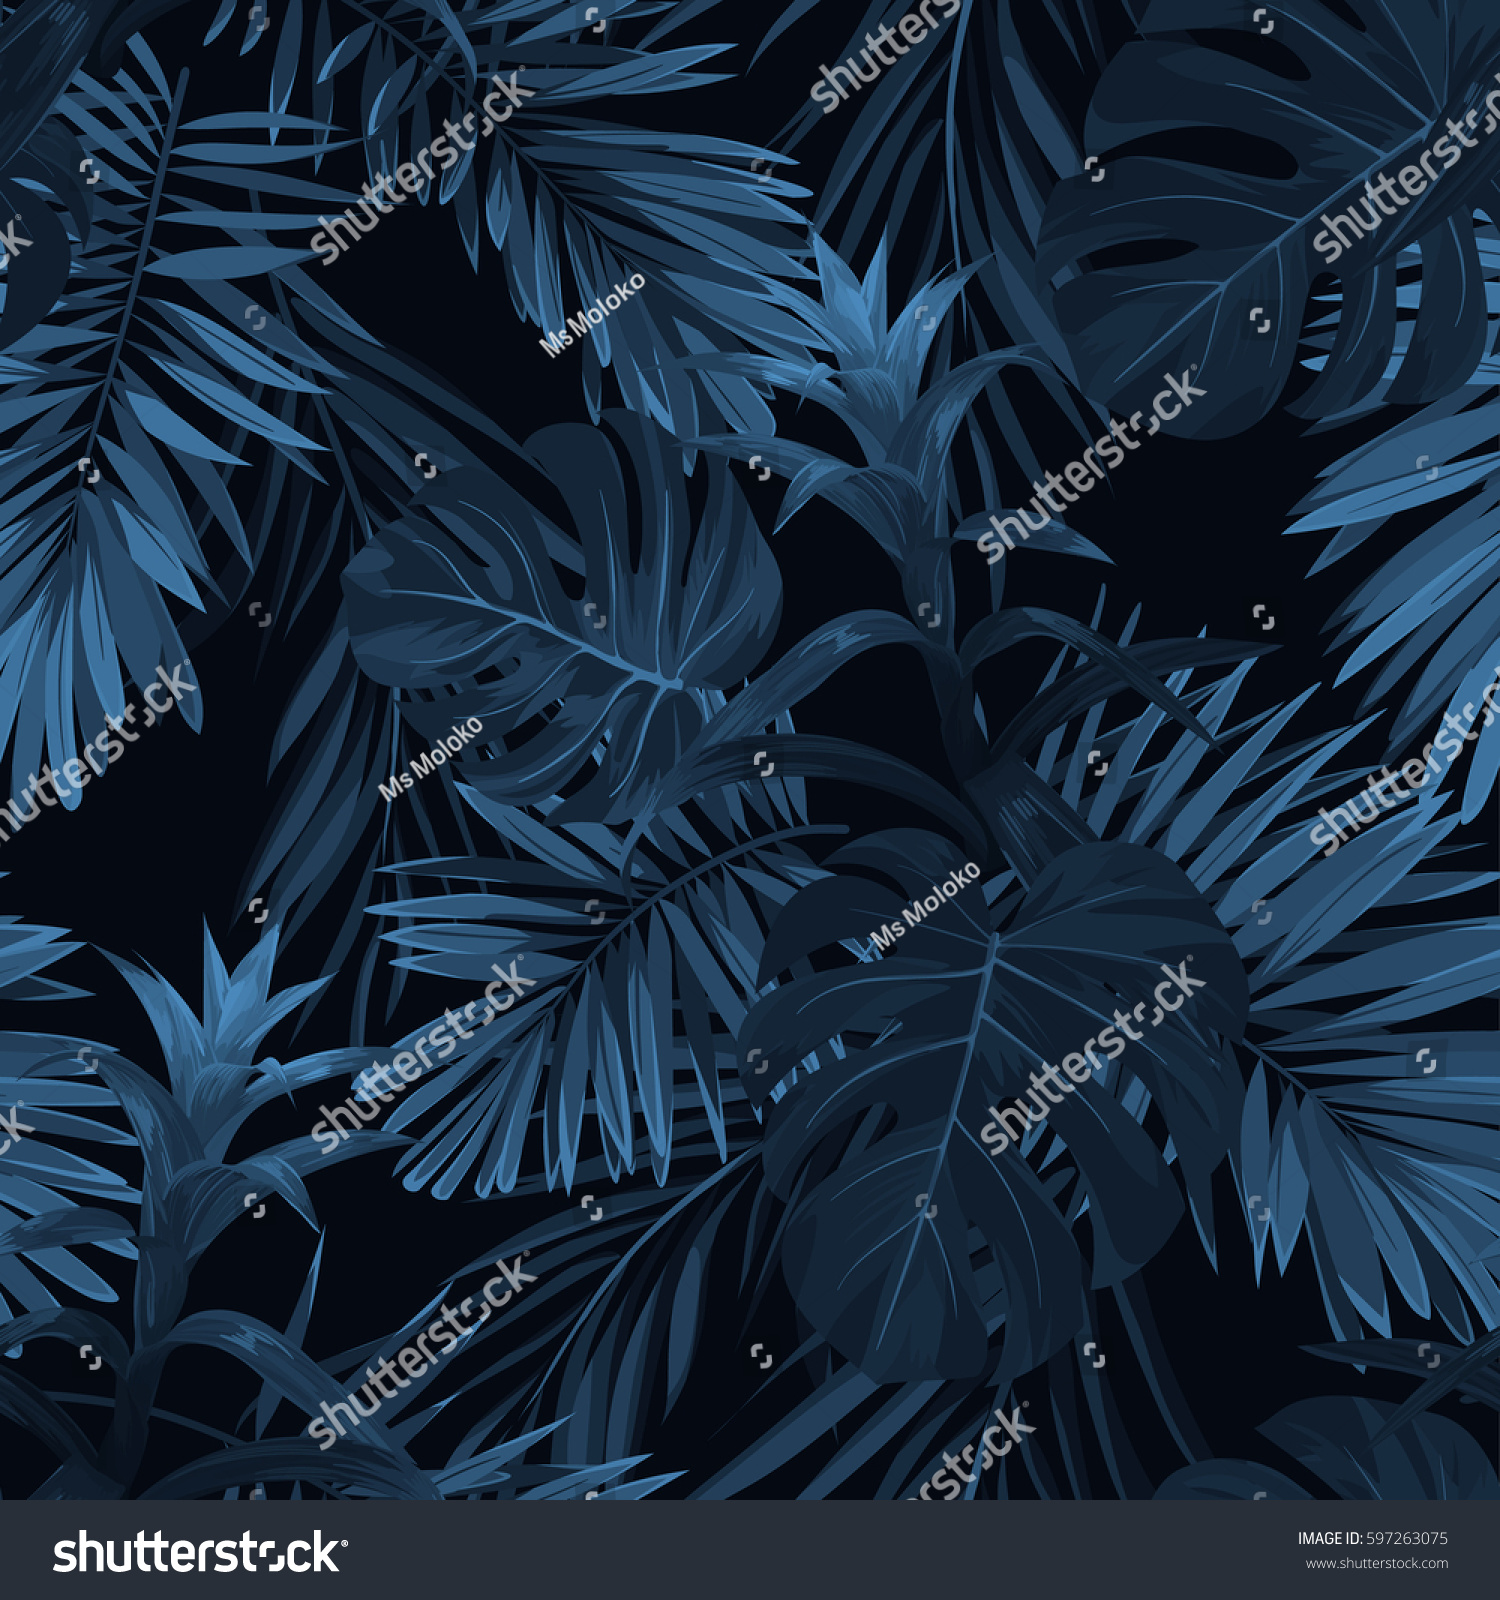 Exotic tropical vrctor background with hawaiian plants and flowers. Seamless indigo tropical pattern with monstera and sabal palm leaves, guzmania flowers. #597263075